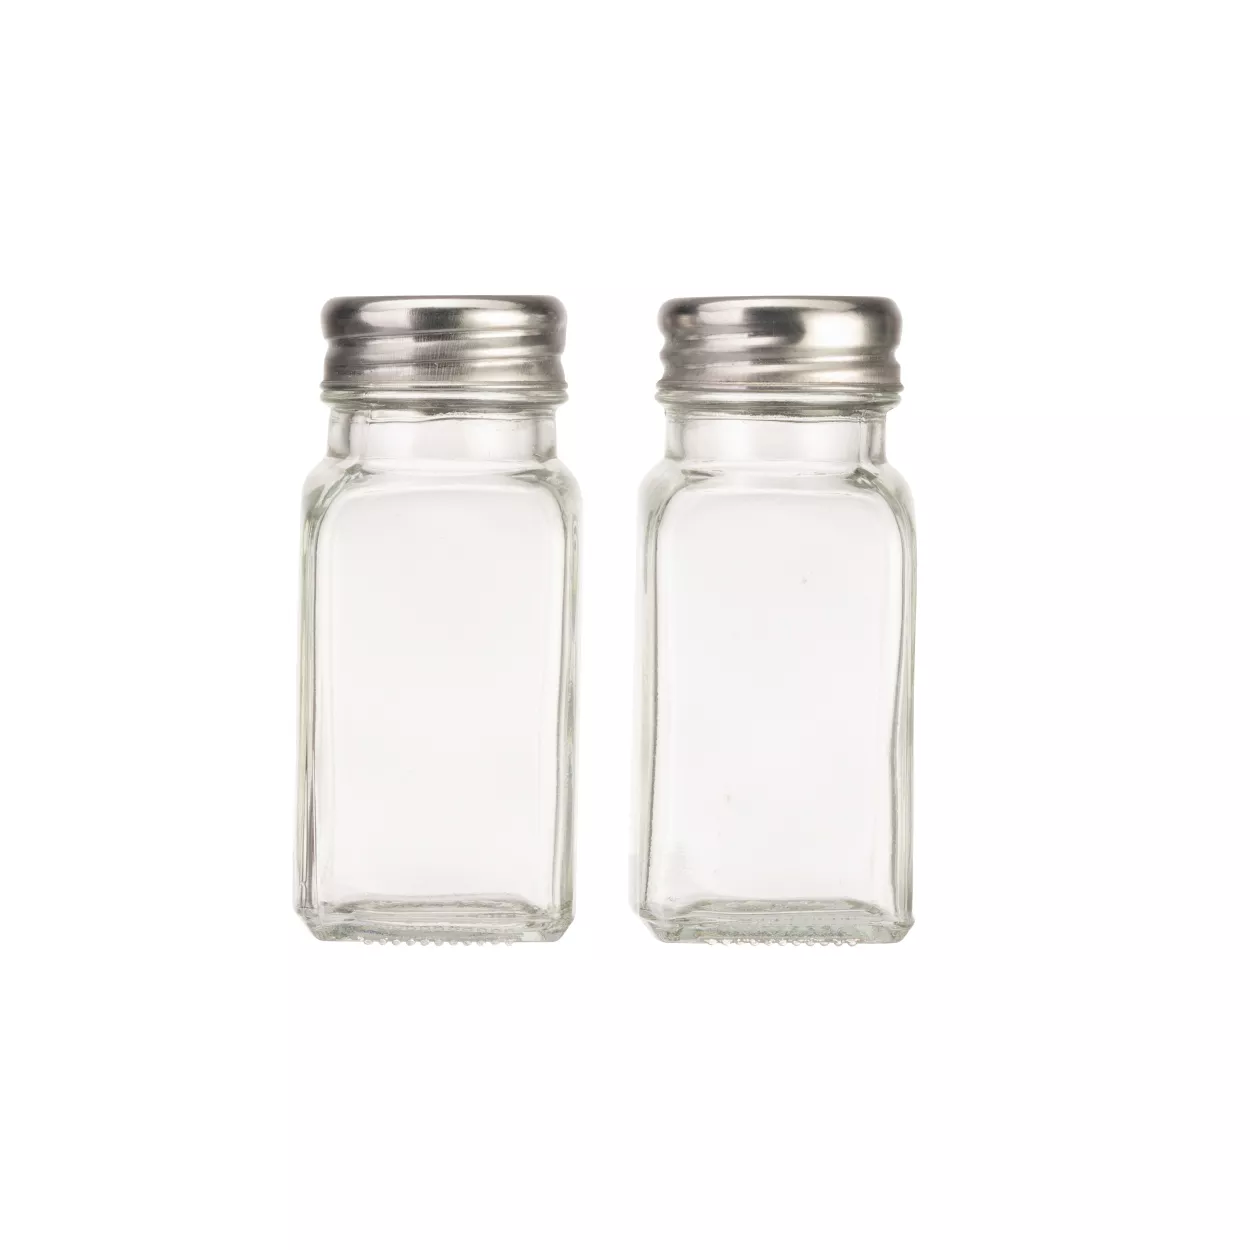 Just The Thing Glass Salt & Pepper Shakers